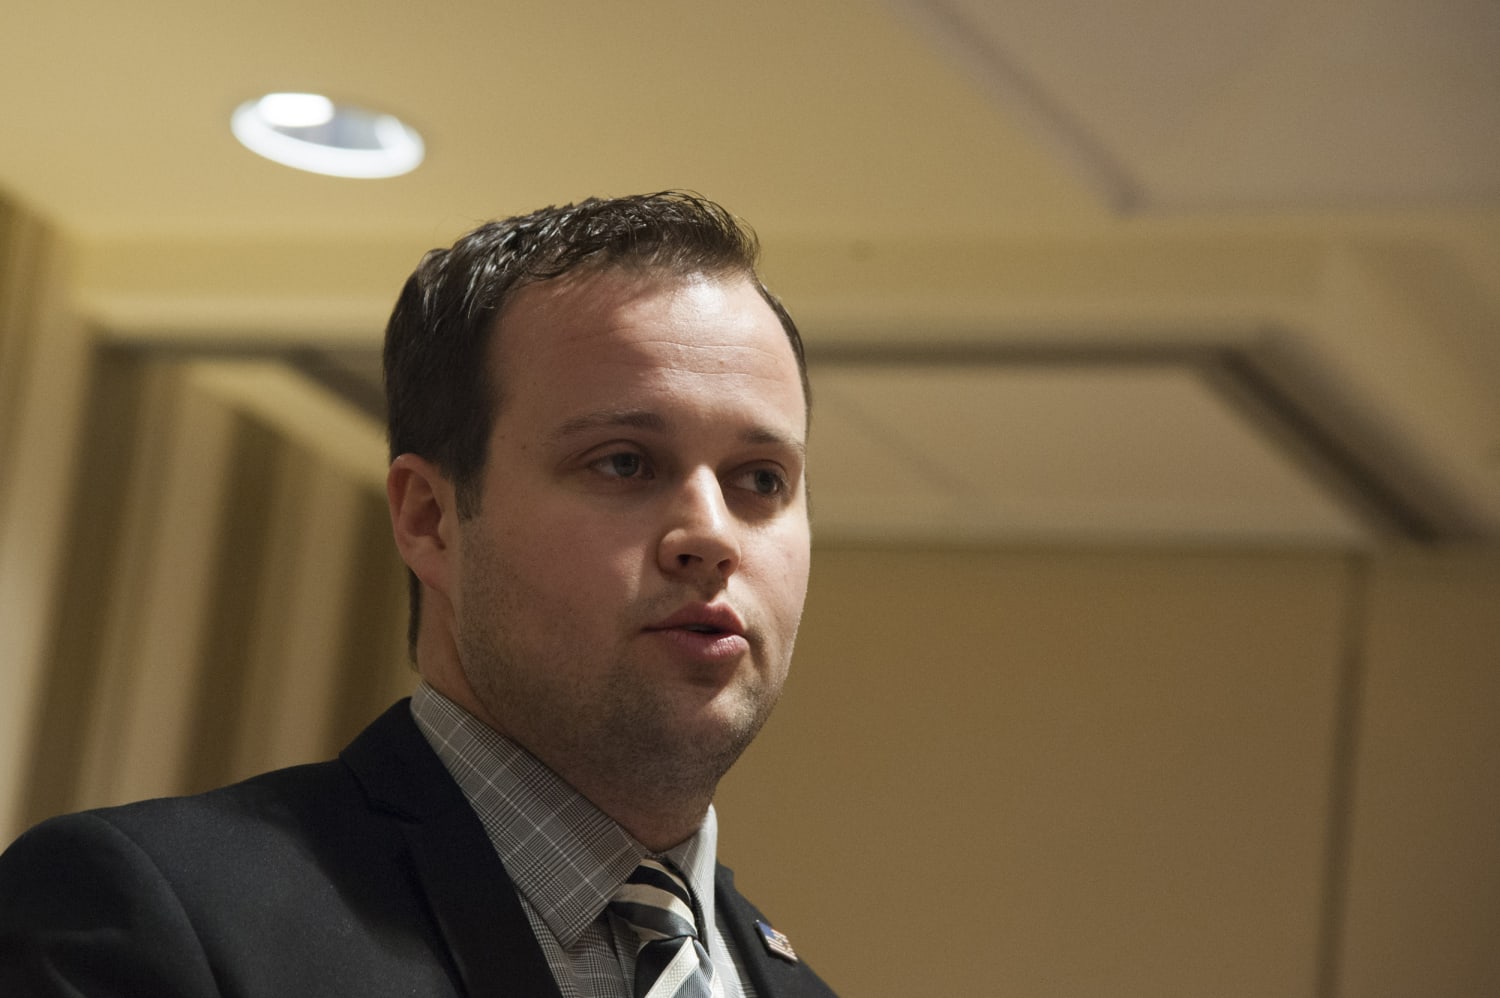 Josh Duggar found guilty in child sex abuse image trial